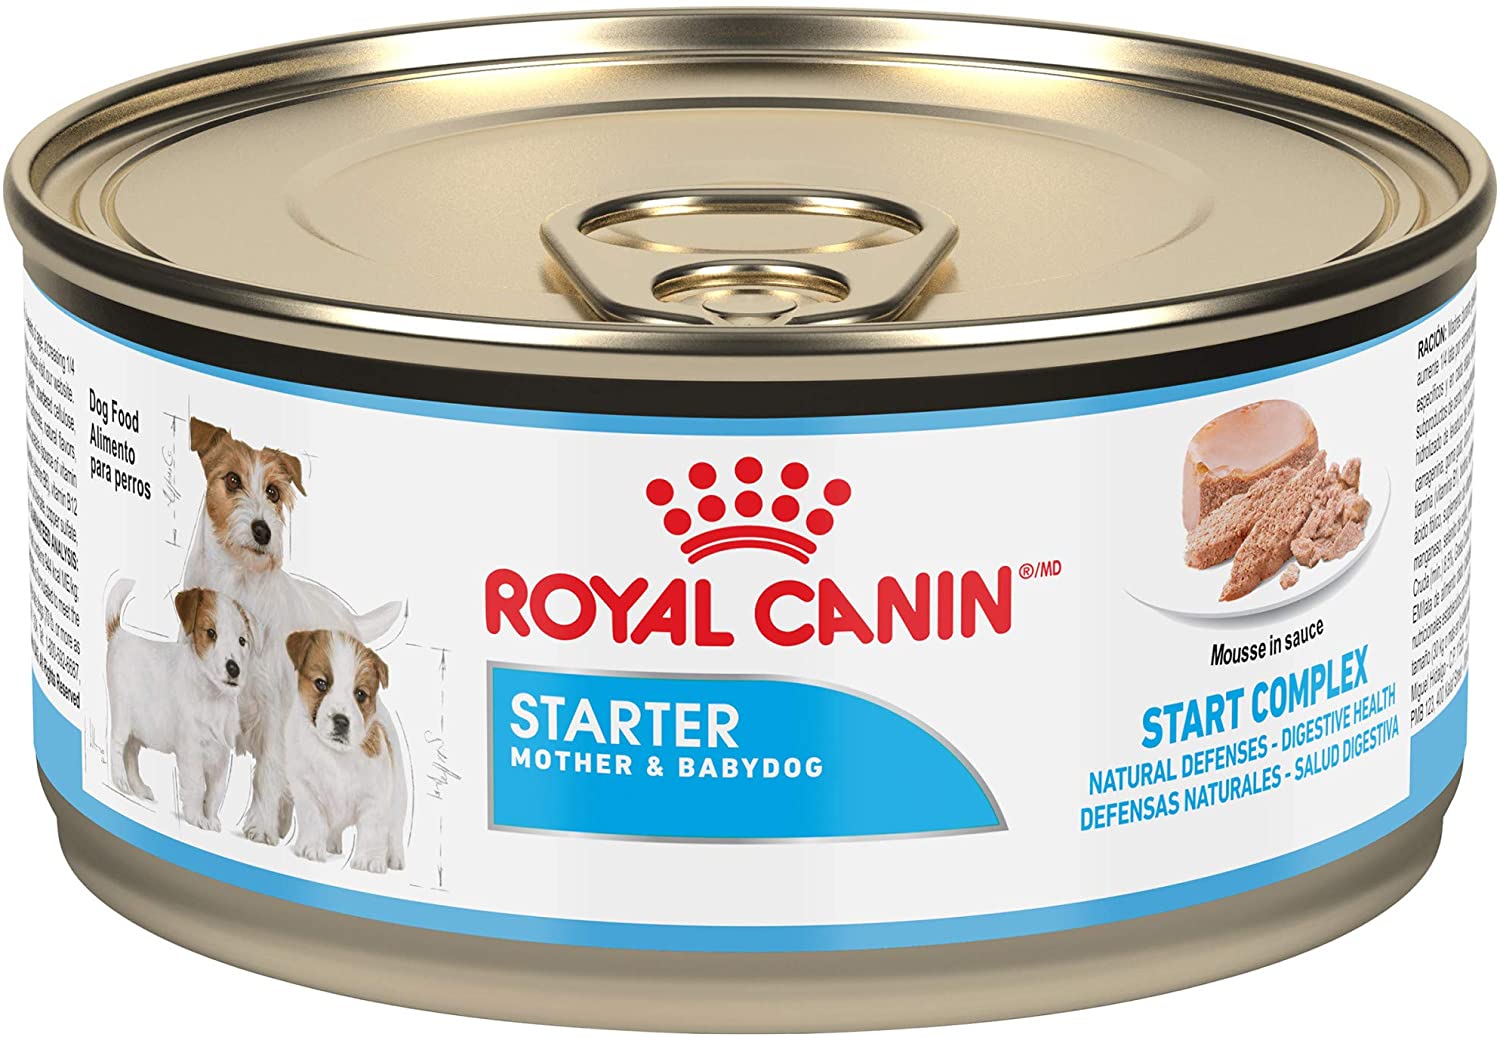  ROYAL CANIN Canine Health Nutrition Starter Mousse Canned Dog Food, 5.8 oz/One Size by 